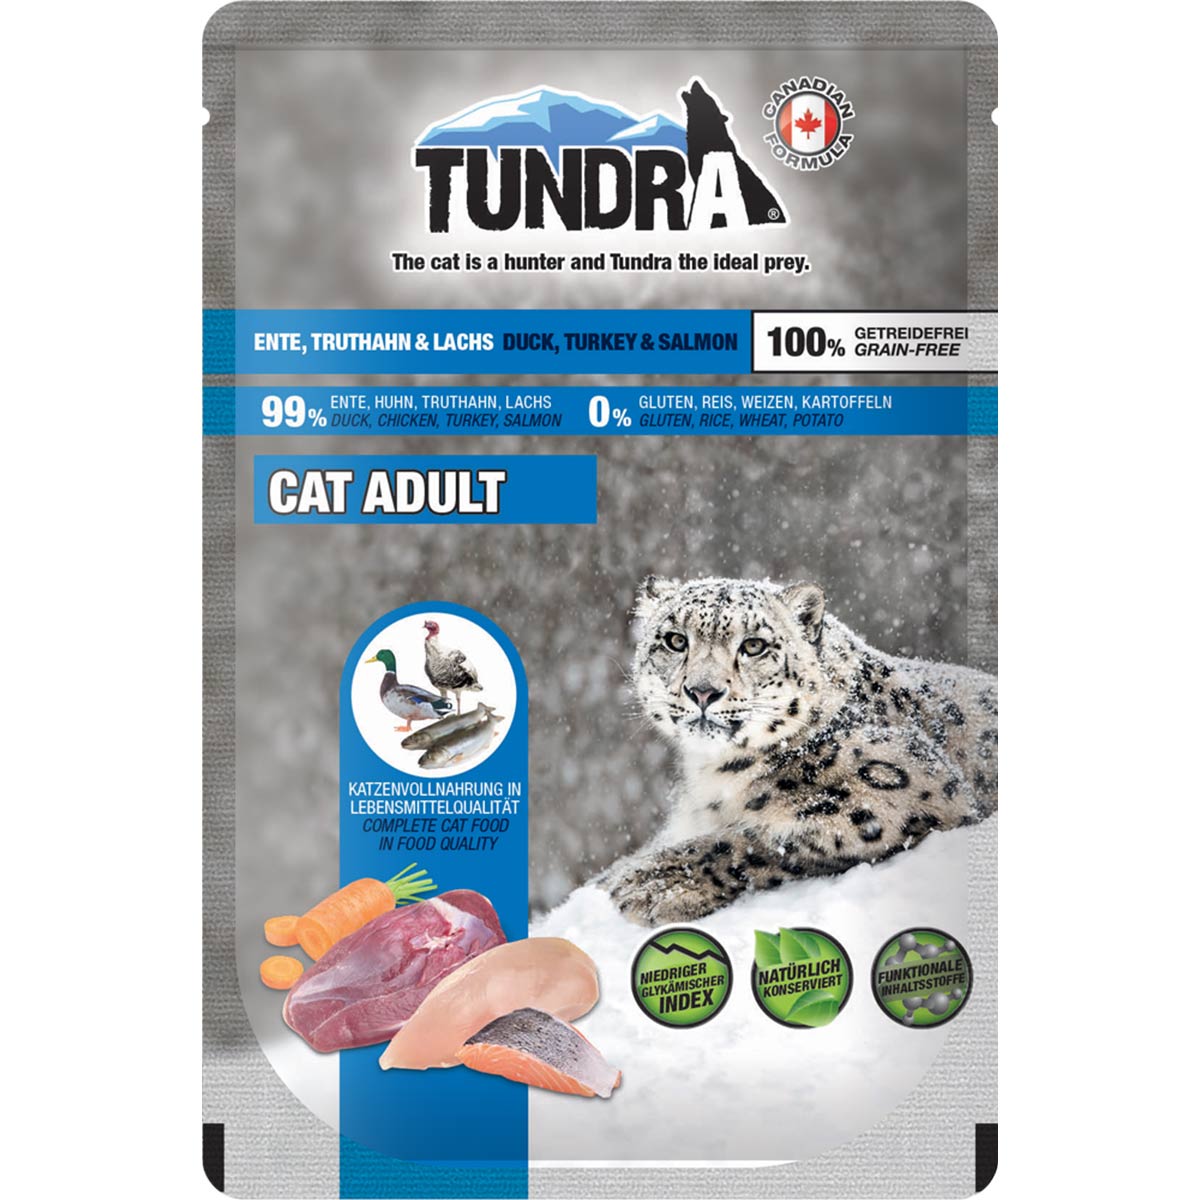 Tundra Cat Pouchpack Ente, Truthahn & Lachs 16x85g